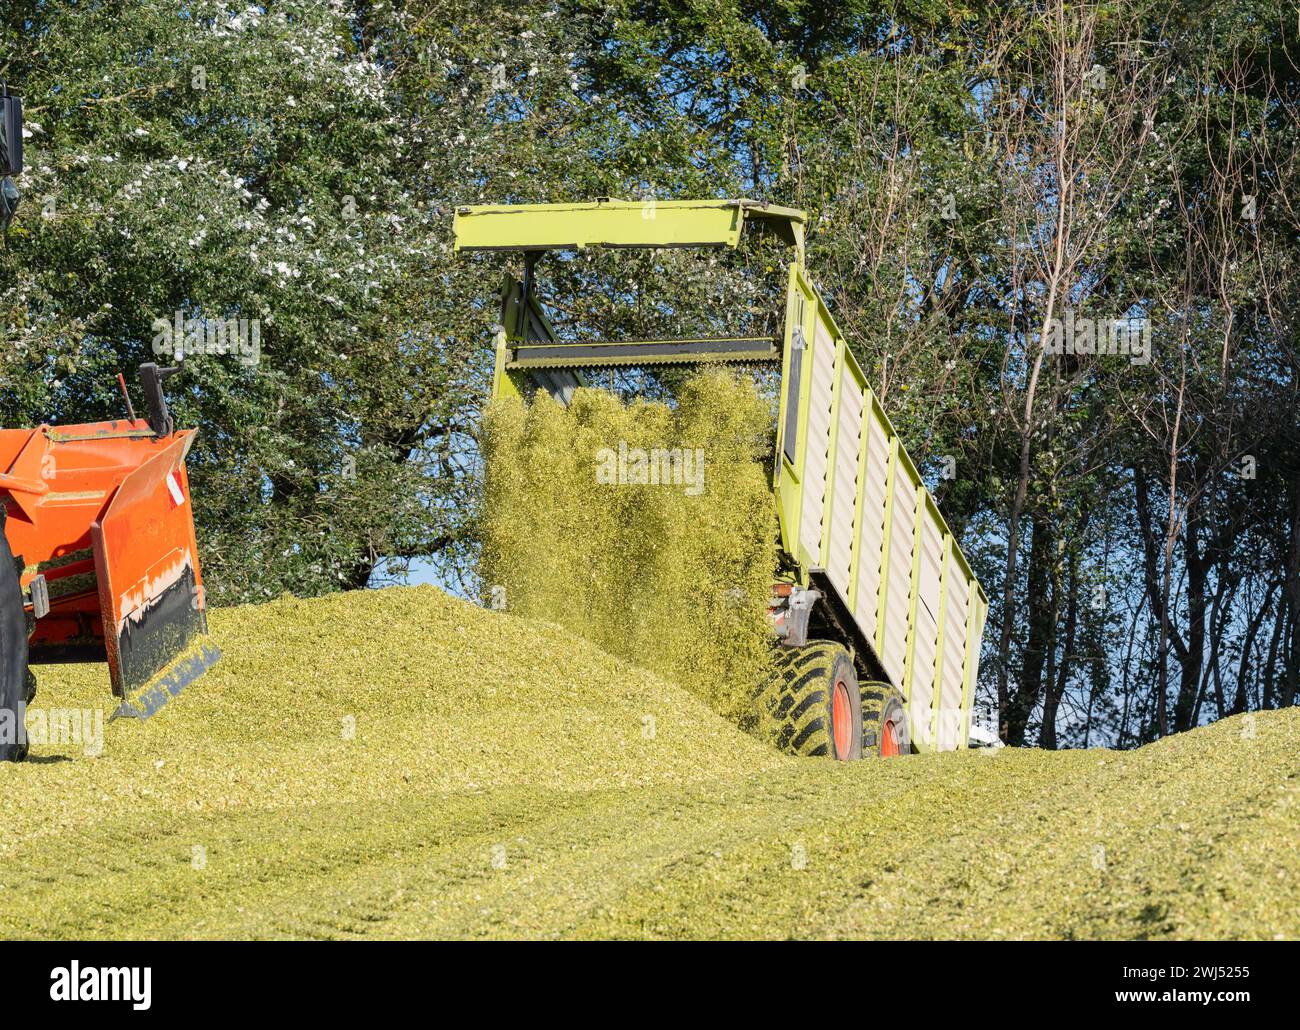 Unloading corn on a corn silage during the corn harvest Stock Photo